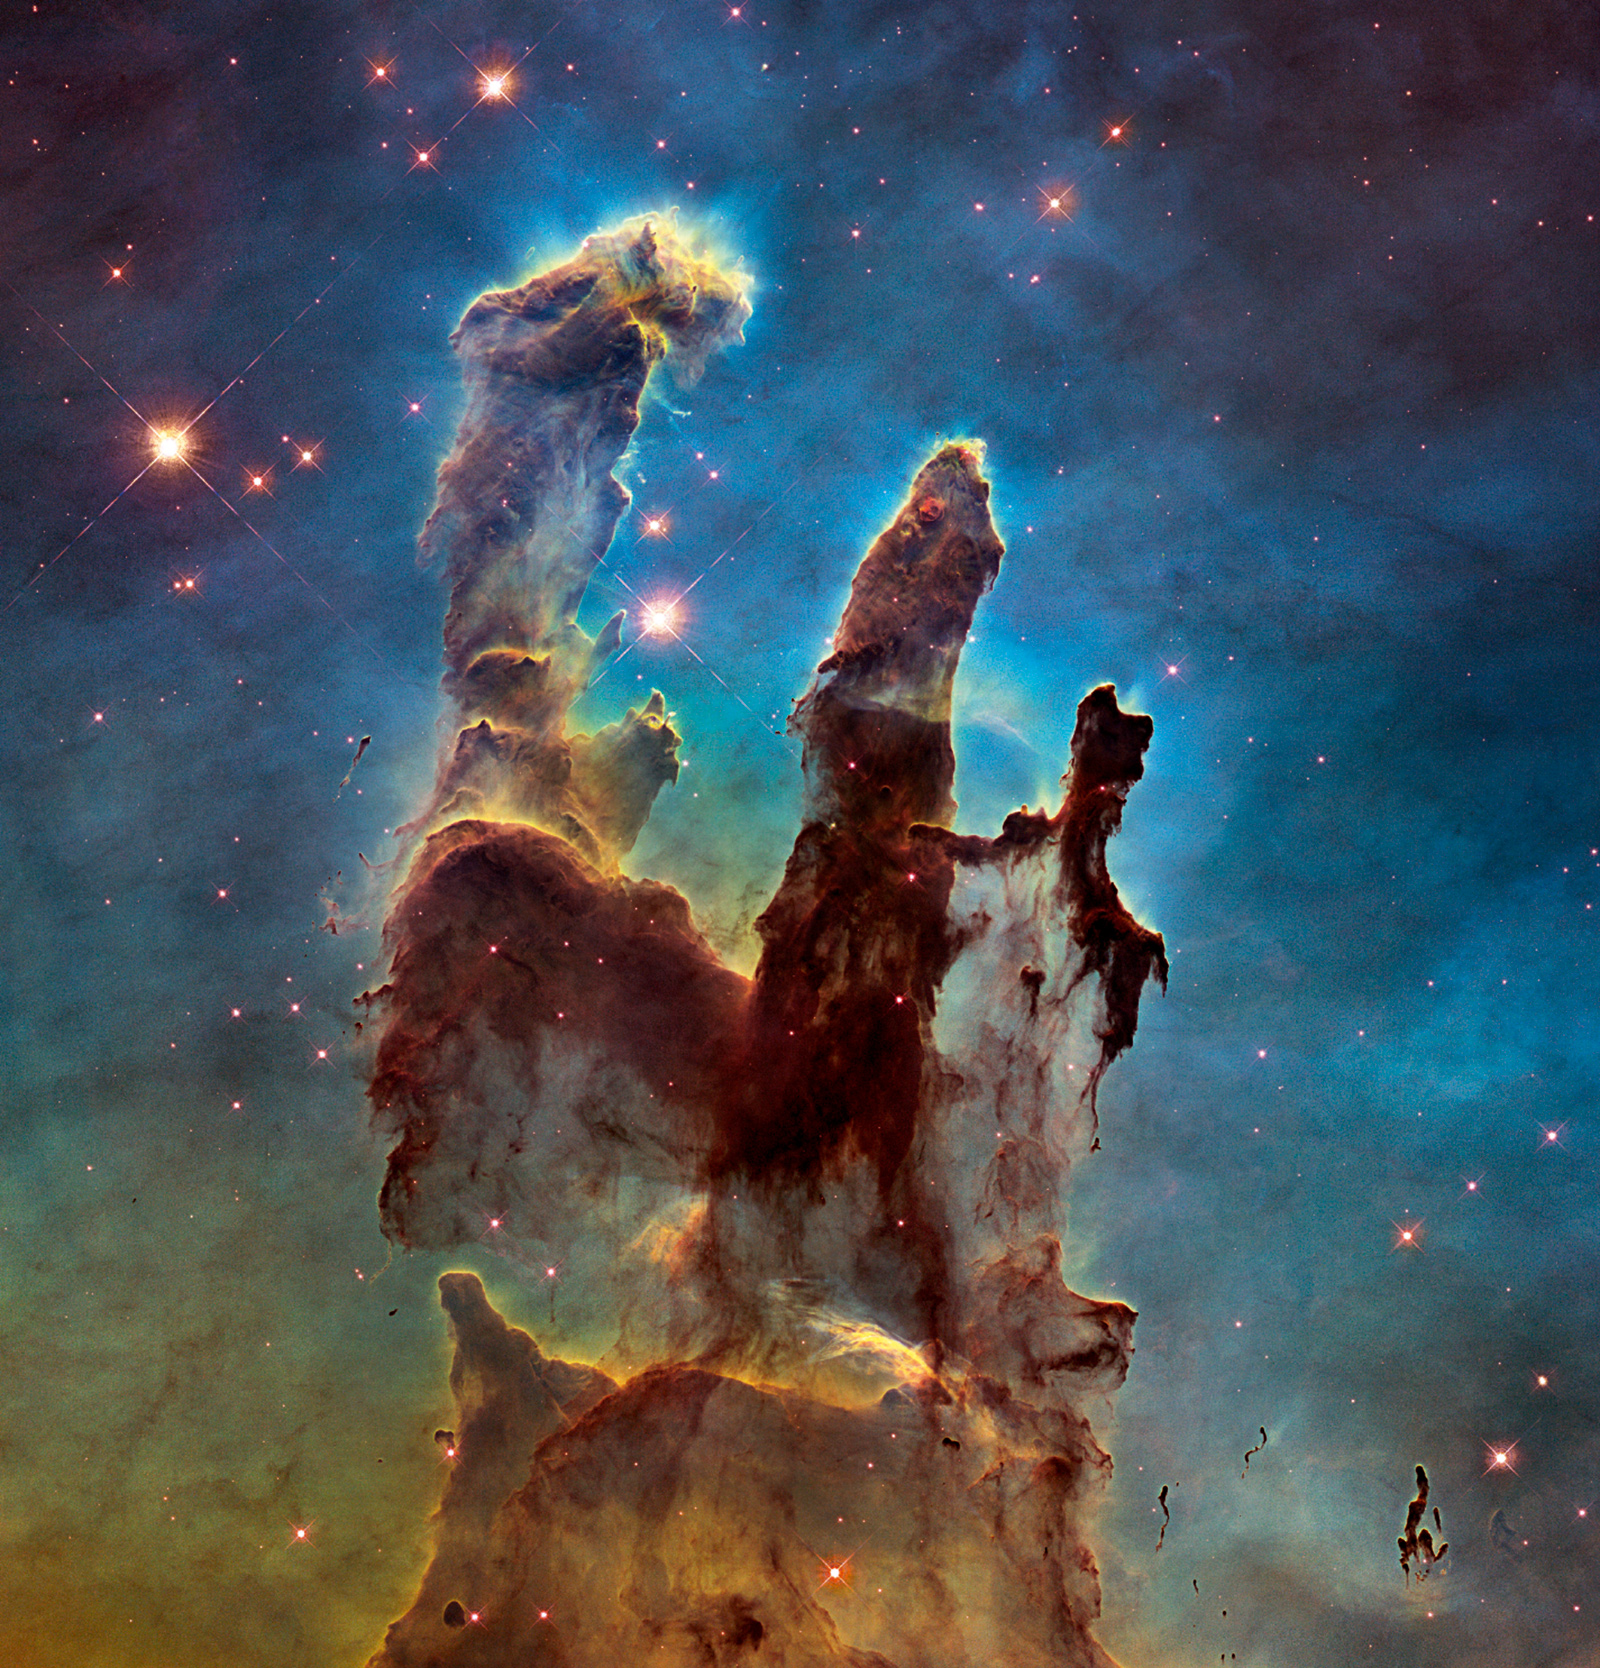 The Pillars of Creation inside the Eagle Nebula, a cloud of interstellar gas and dust about 6,500 light years away from Earth; from Expanding Universe: Photographs from the Hubble Space Telescope, published by Taschen last year on the twenty-fifth anniversary of the Hubble launch